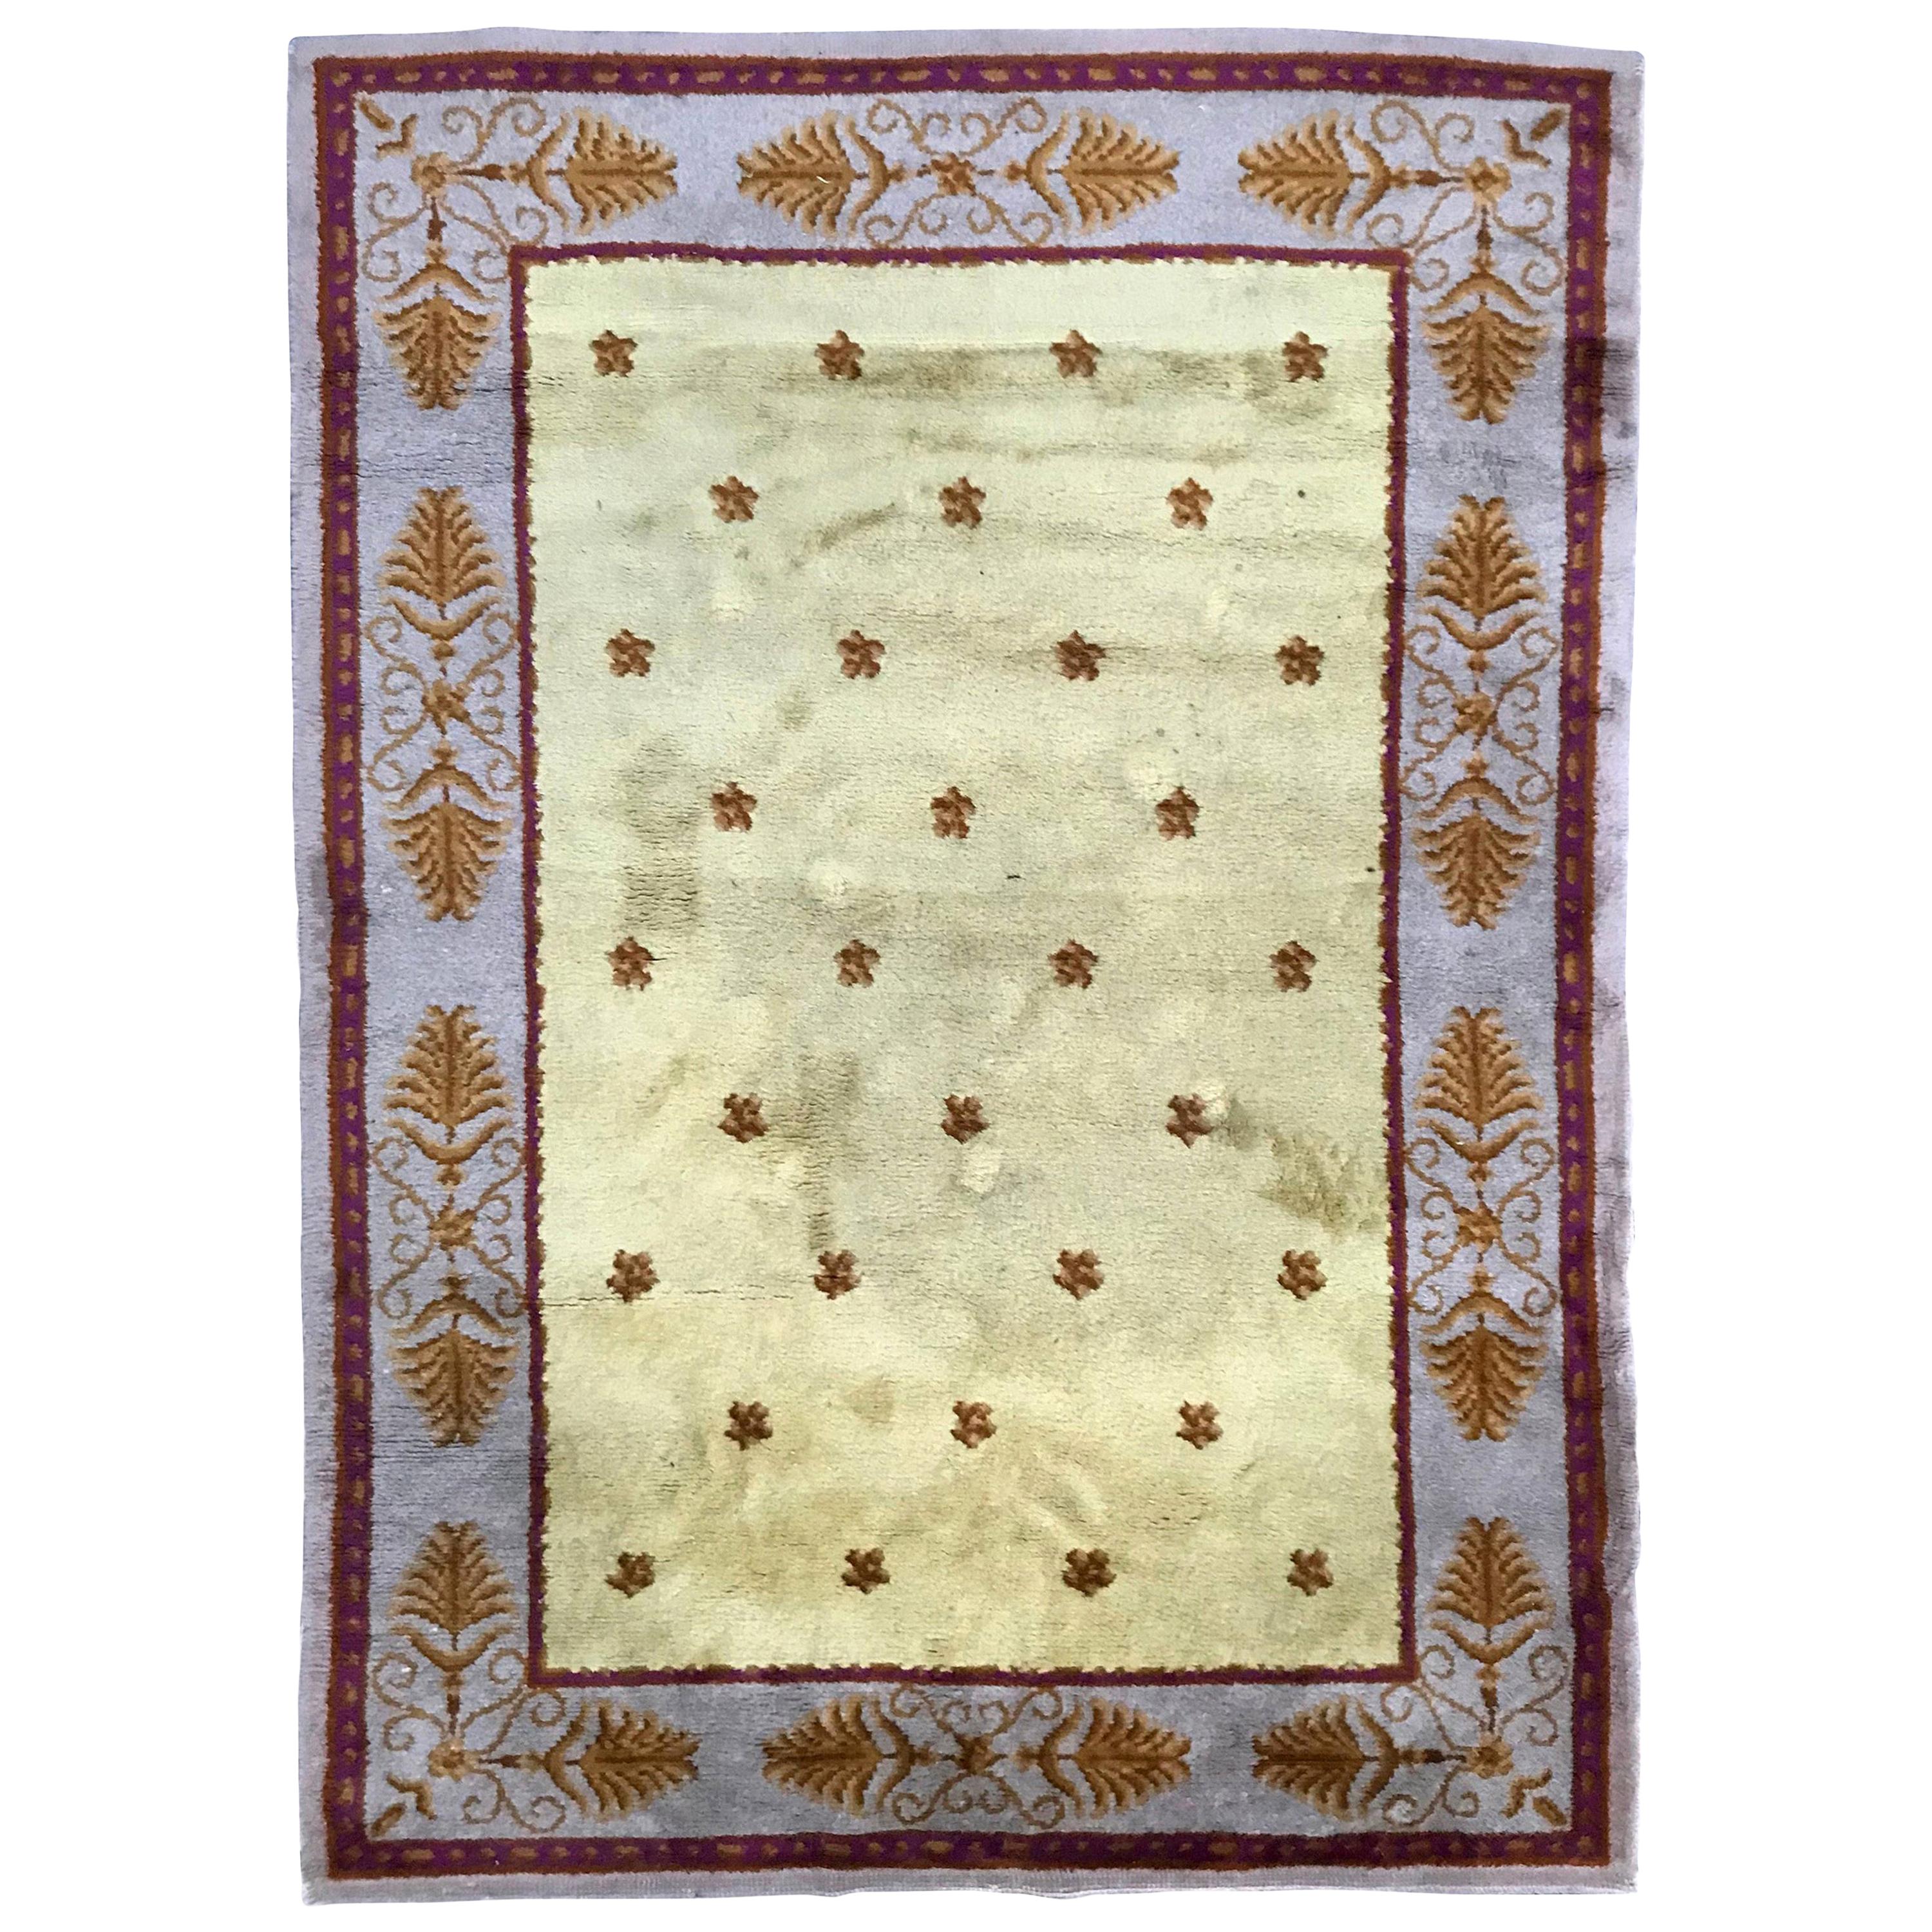 Bobyrug’s Nice Antique French Savonnerie Rug